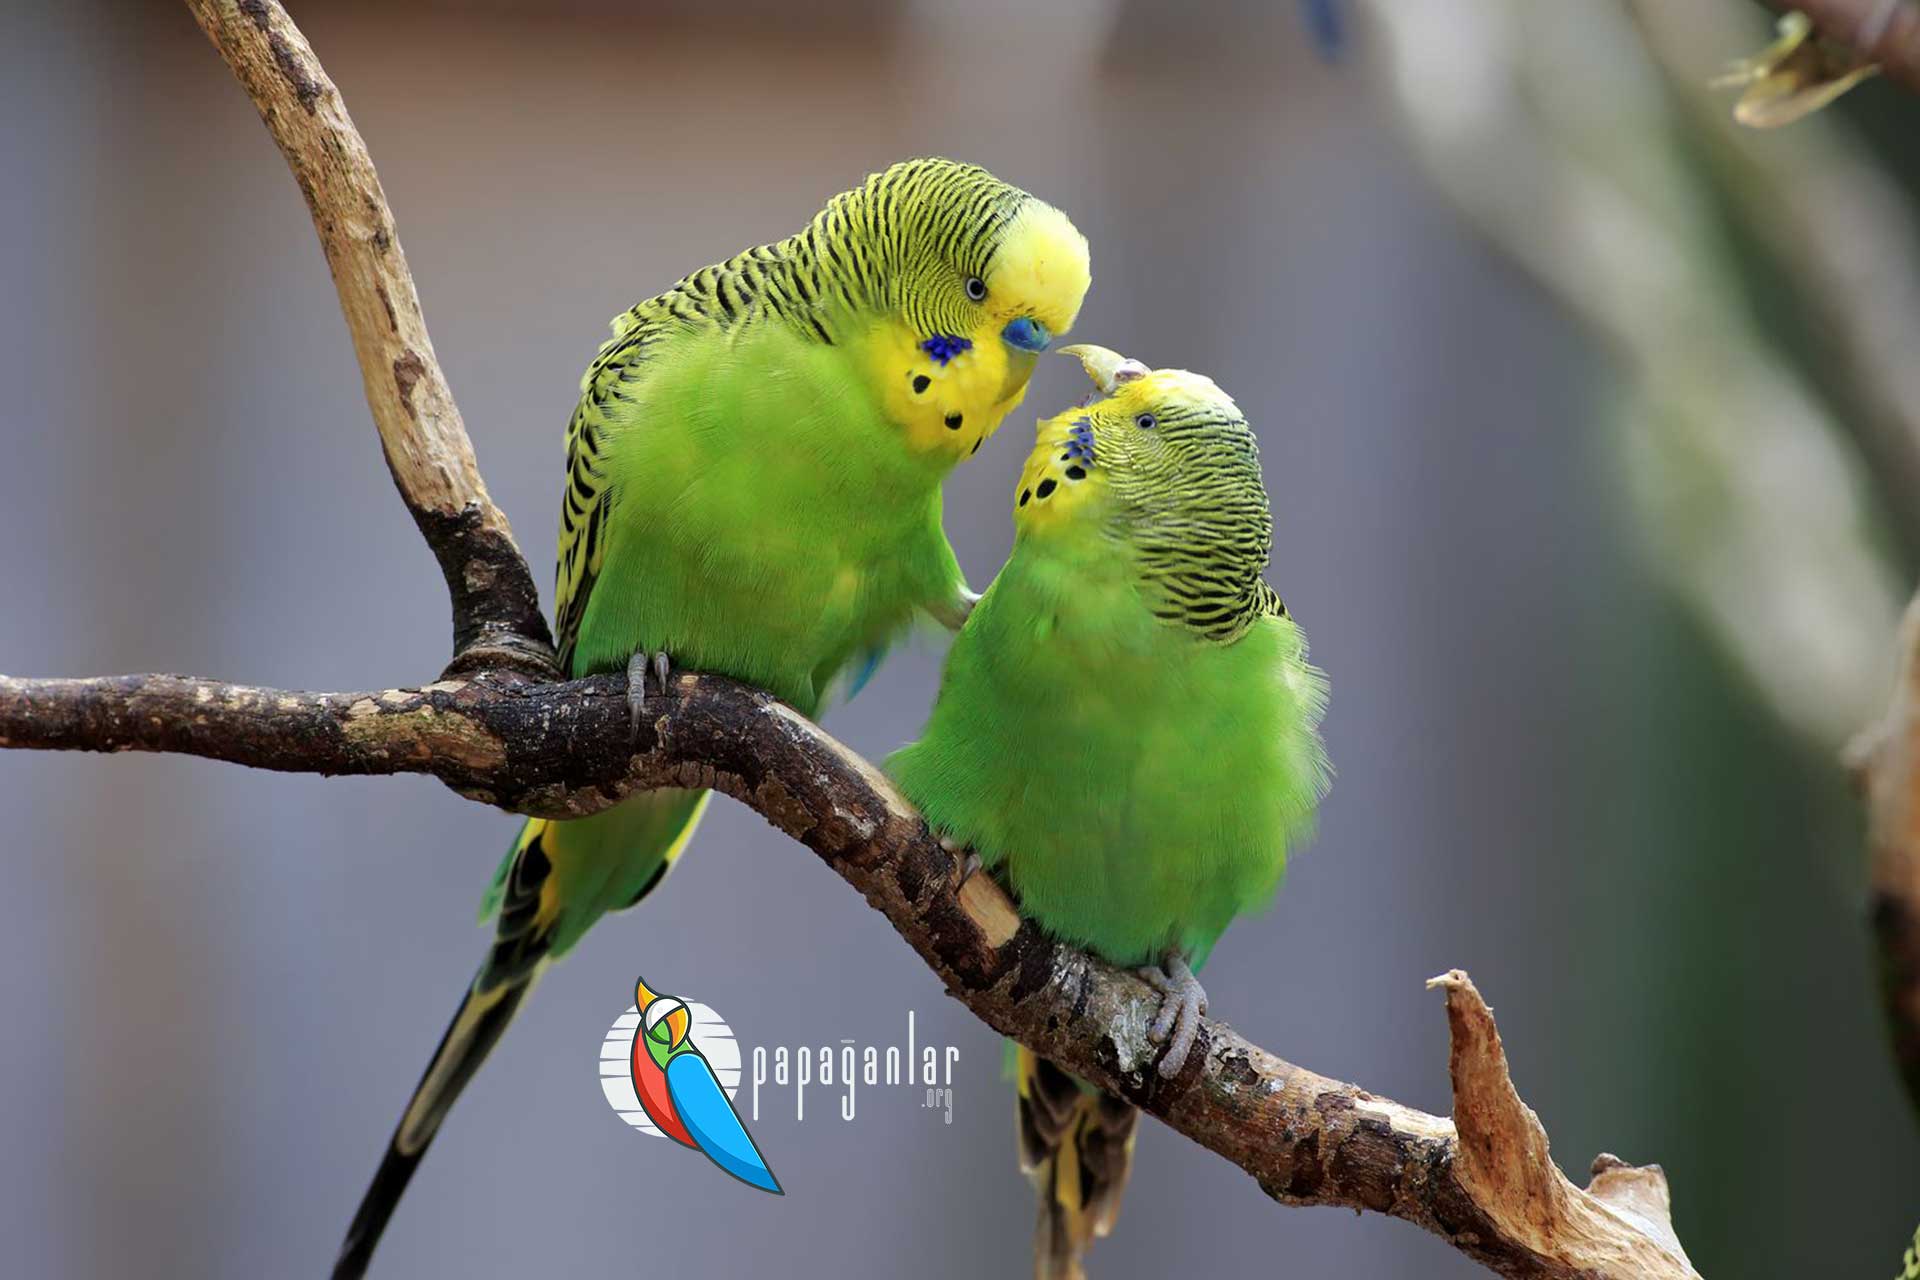 Places selling Budgerigars